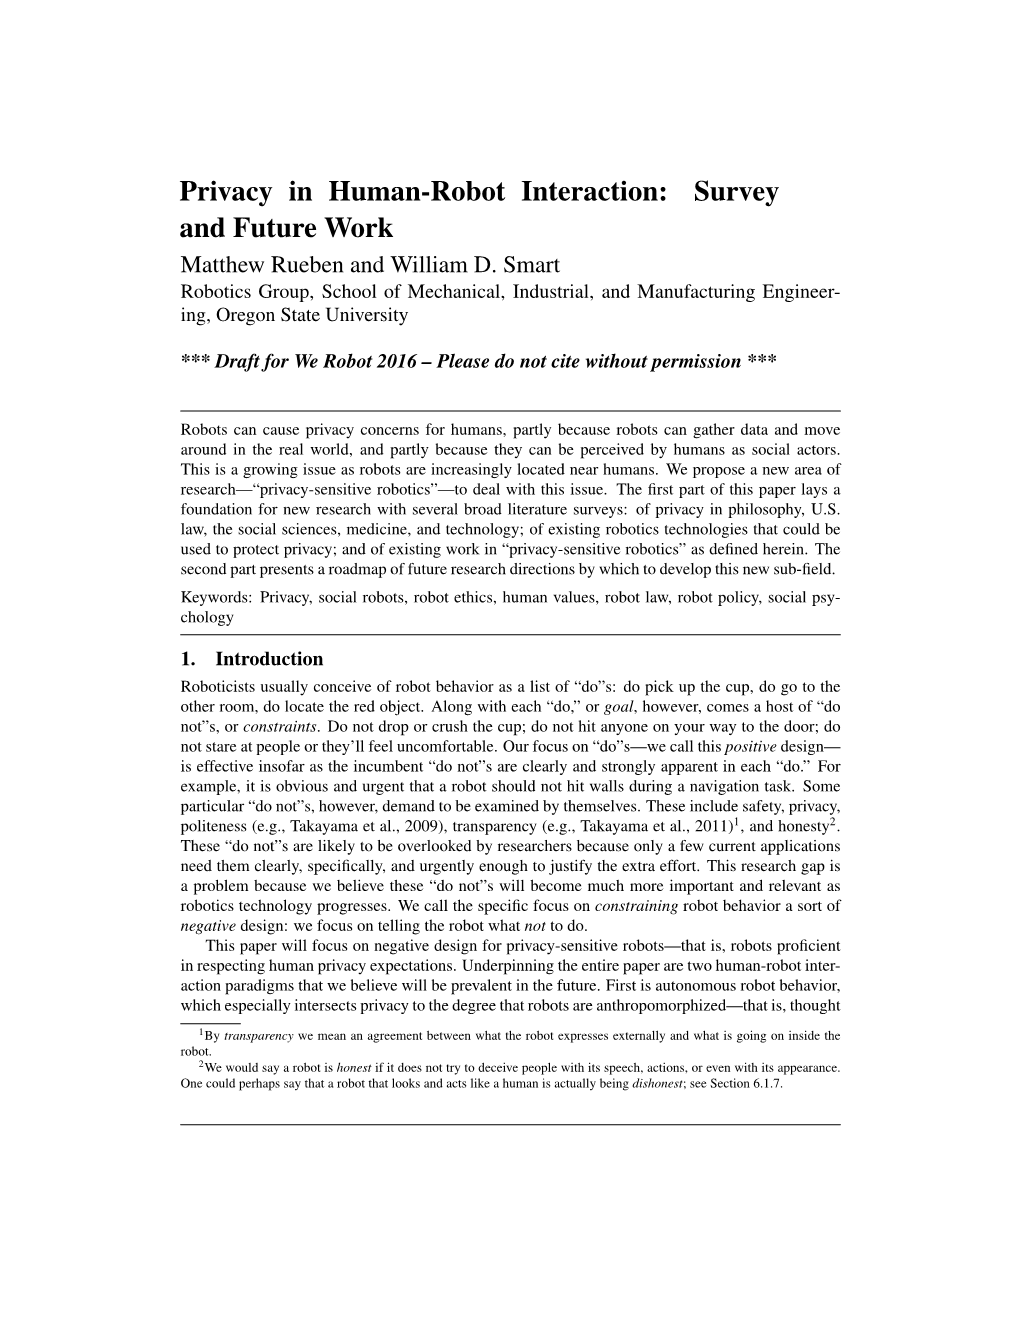 Privacy in Human-Robot Interaction: Survey and Future Work Matthew Rueben and William D